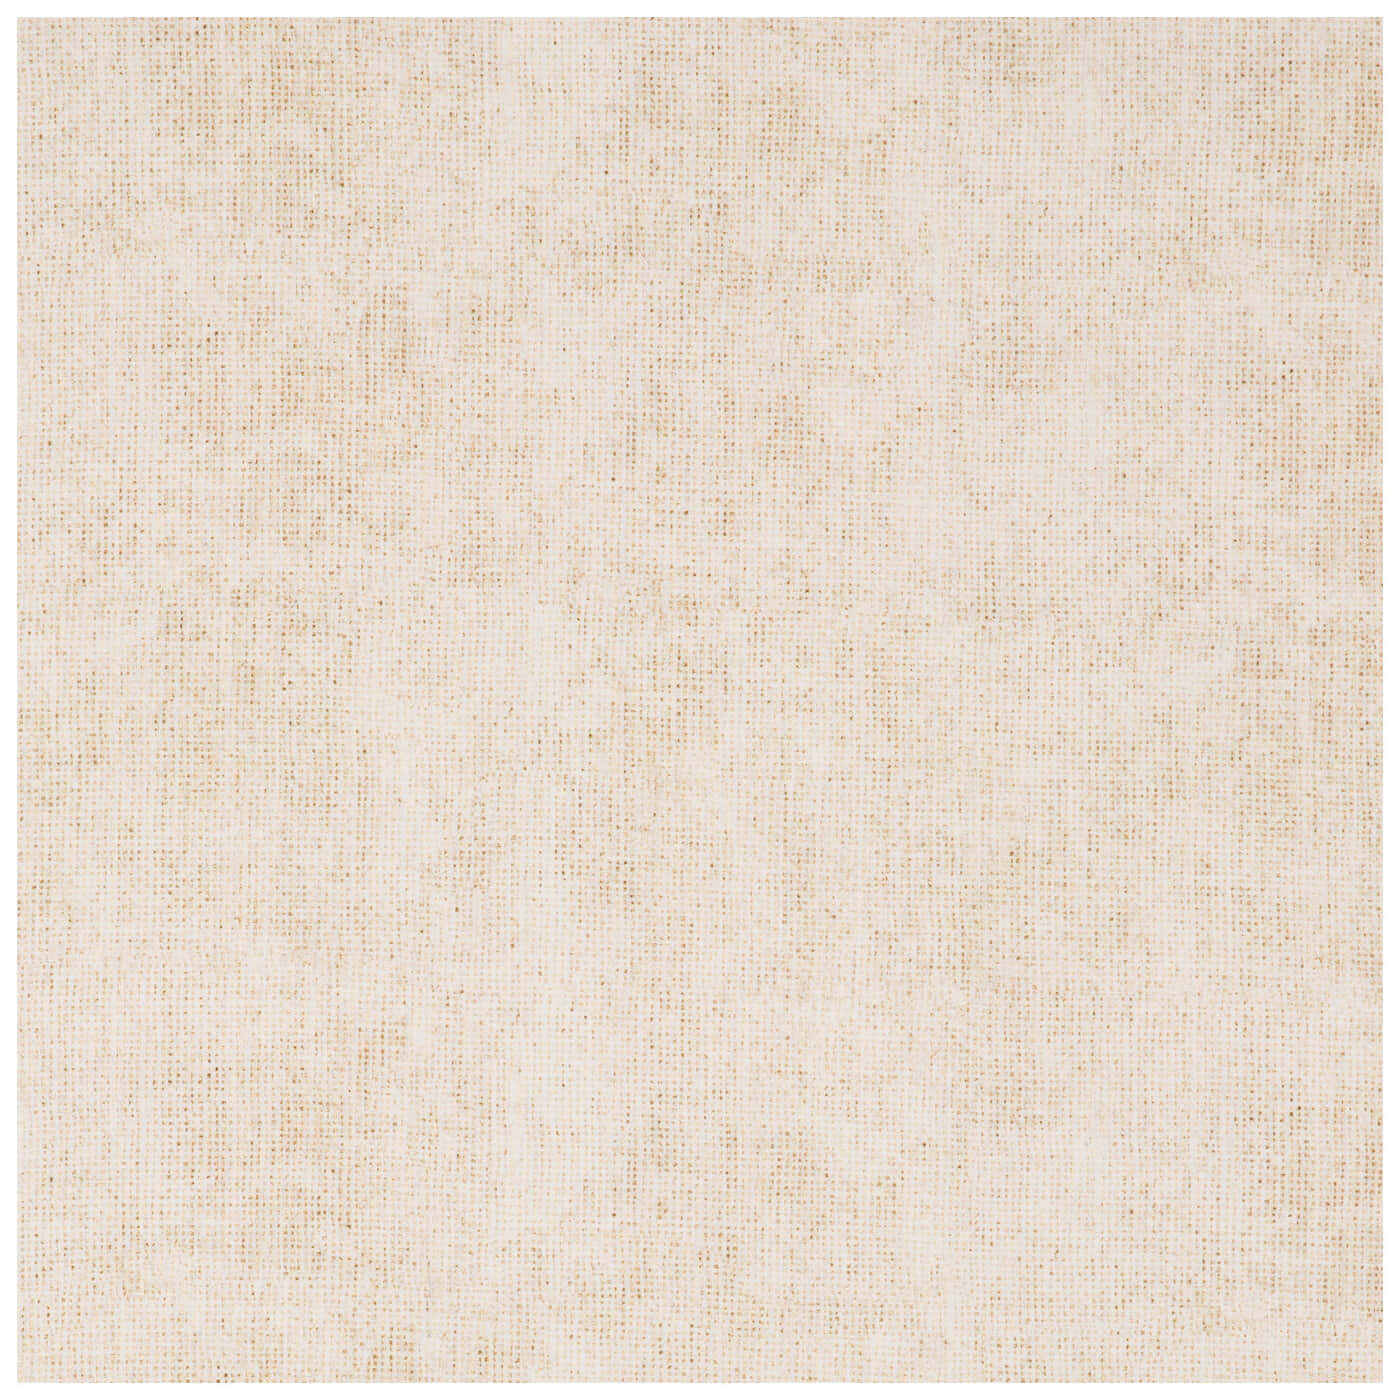 A Beige And White Rug With A White Background